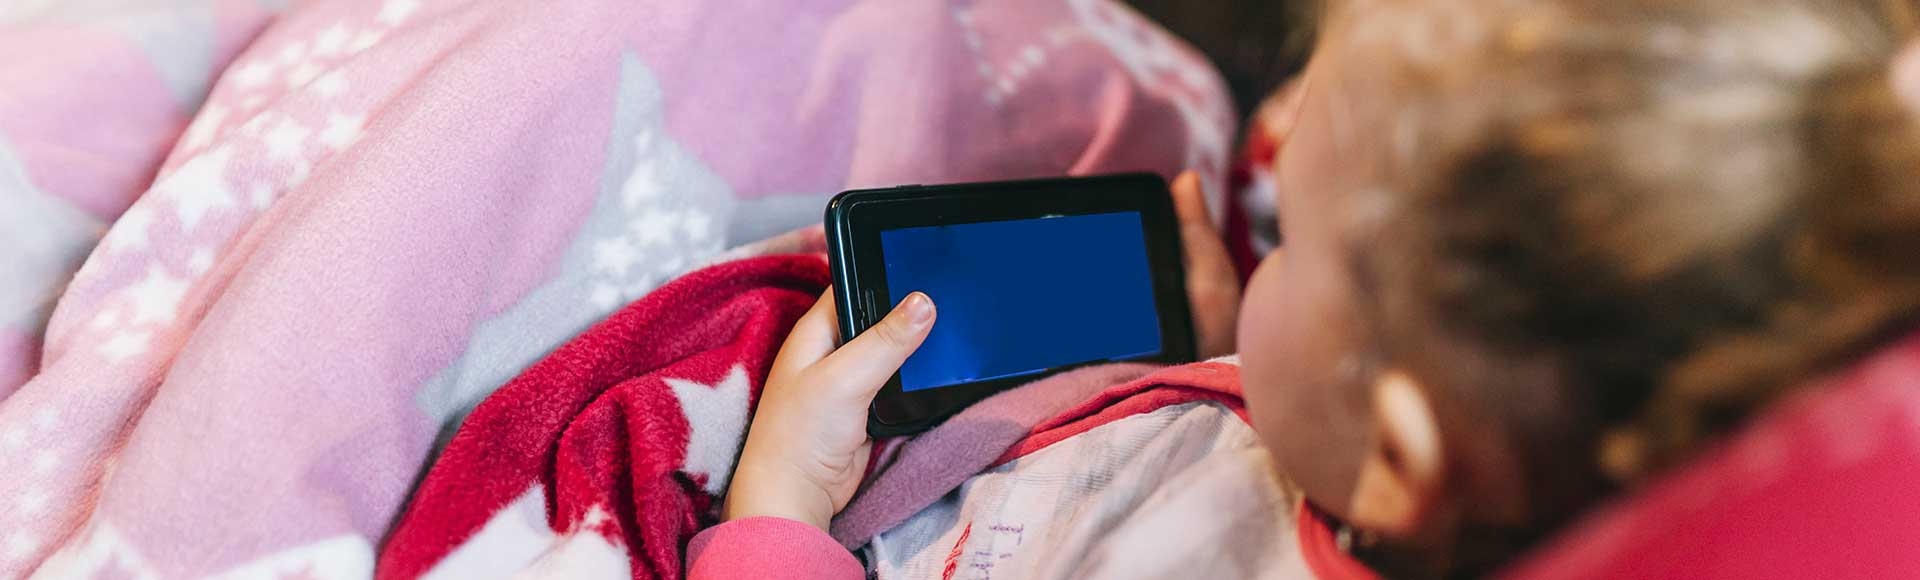 The Impact of Media Use and Screen Time on Children